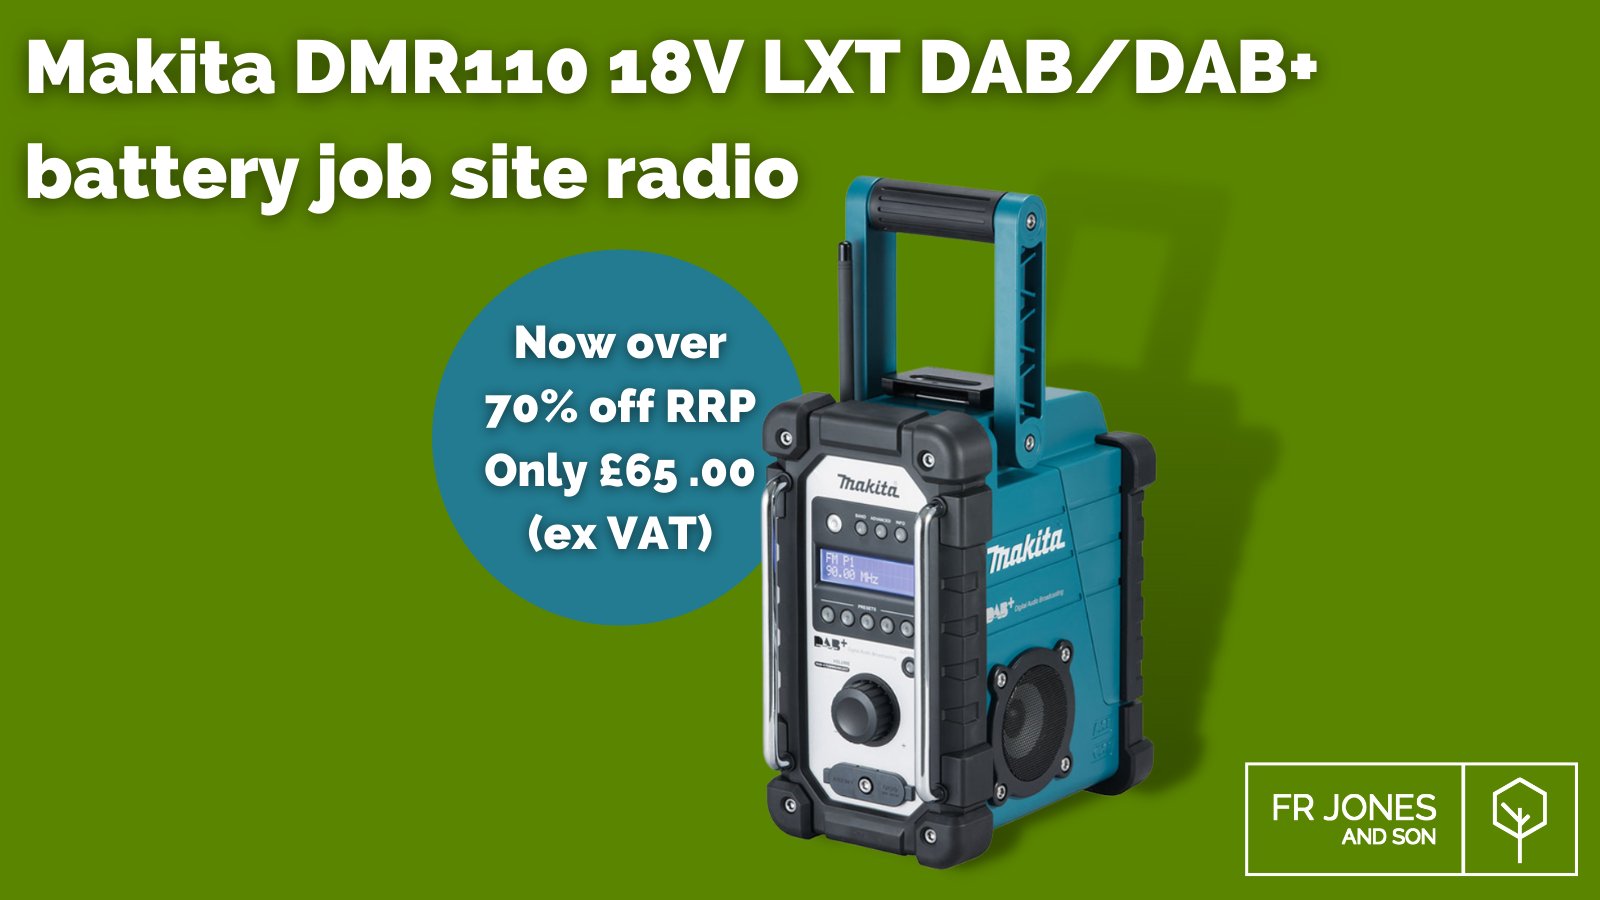 scrapbog Vend tilbage Forebyggelse F.R. Jones & Son on Twitter: "The Makita DMR110 DAB/DAB+ Job Site Radio,  capable of receiving both DAB and DAB+, is now 70% off RRP at only £65.00  (ex VAT). To get